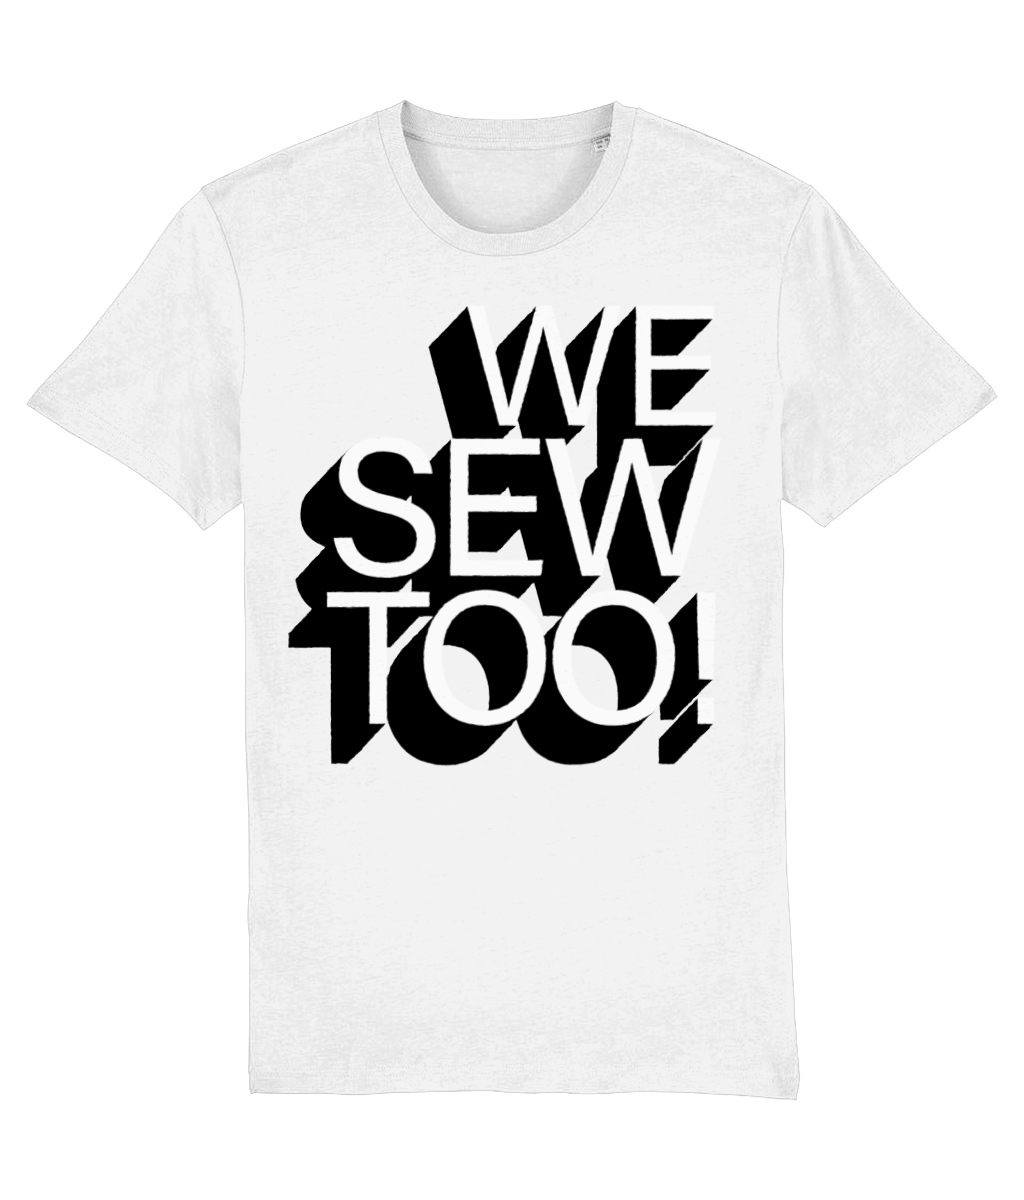 We Sew Too Adult T-Shirt - Black and White